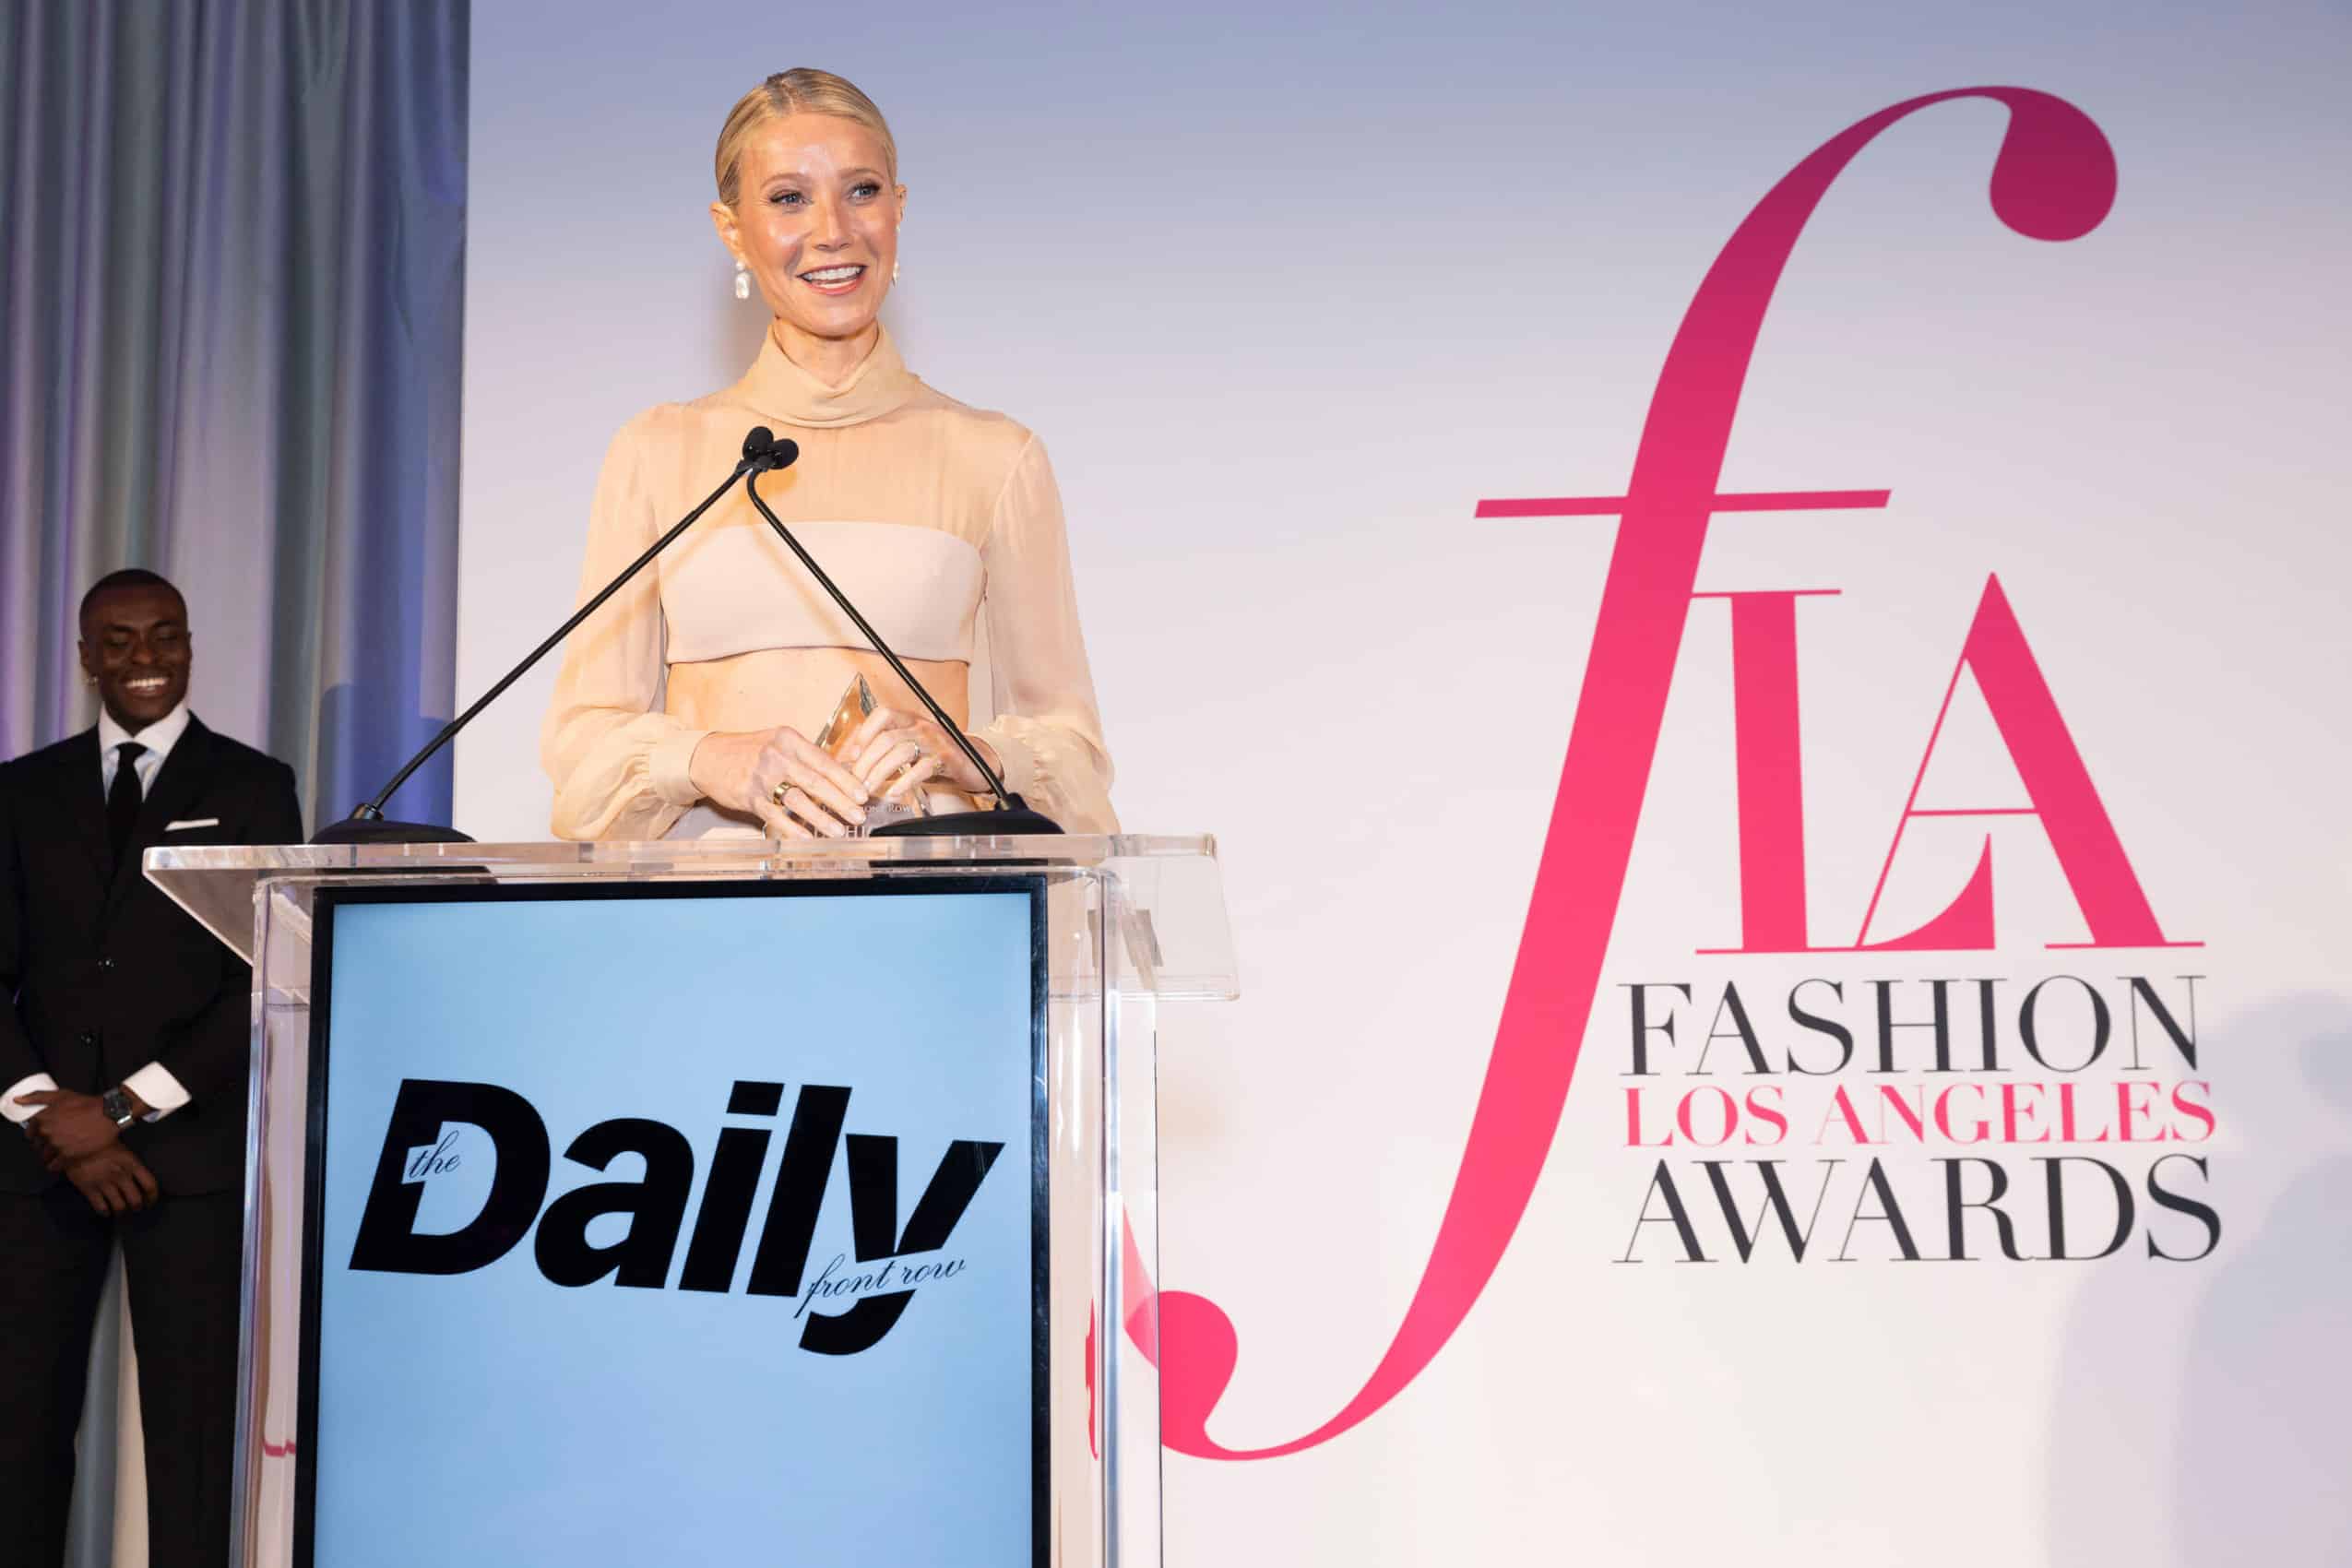 Watch Highlights From The 7th Annual Fashion Los Angeles Awards